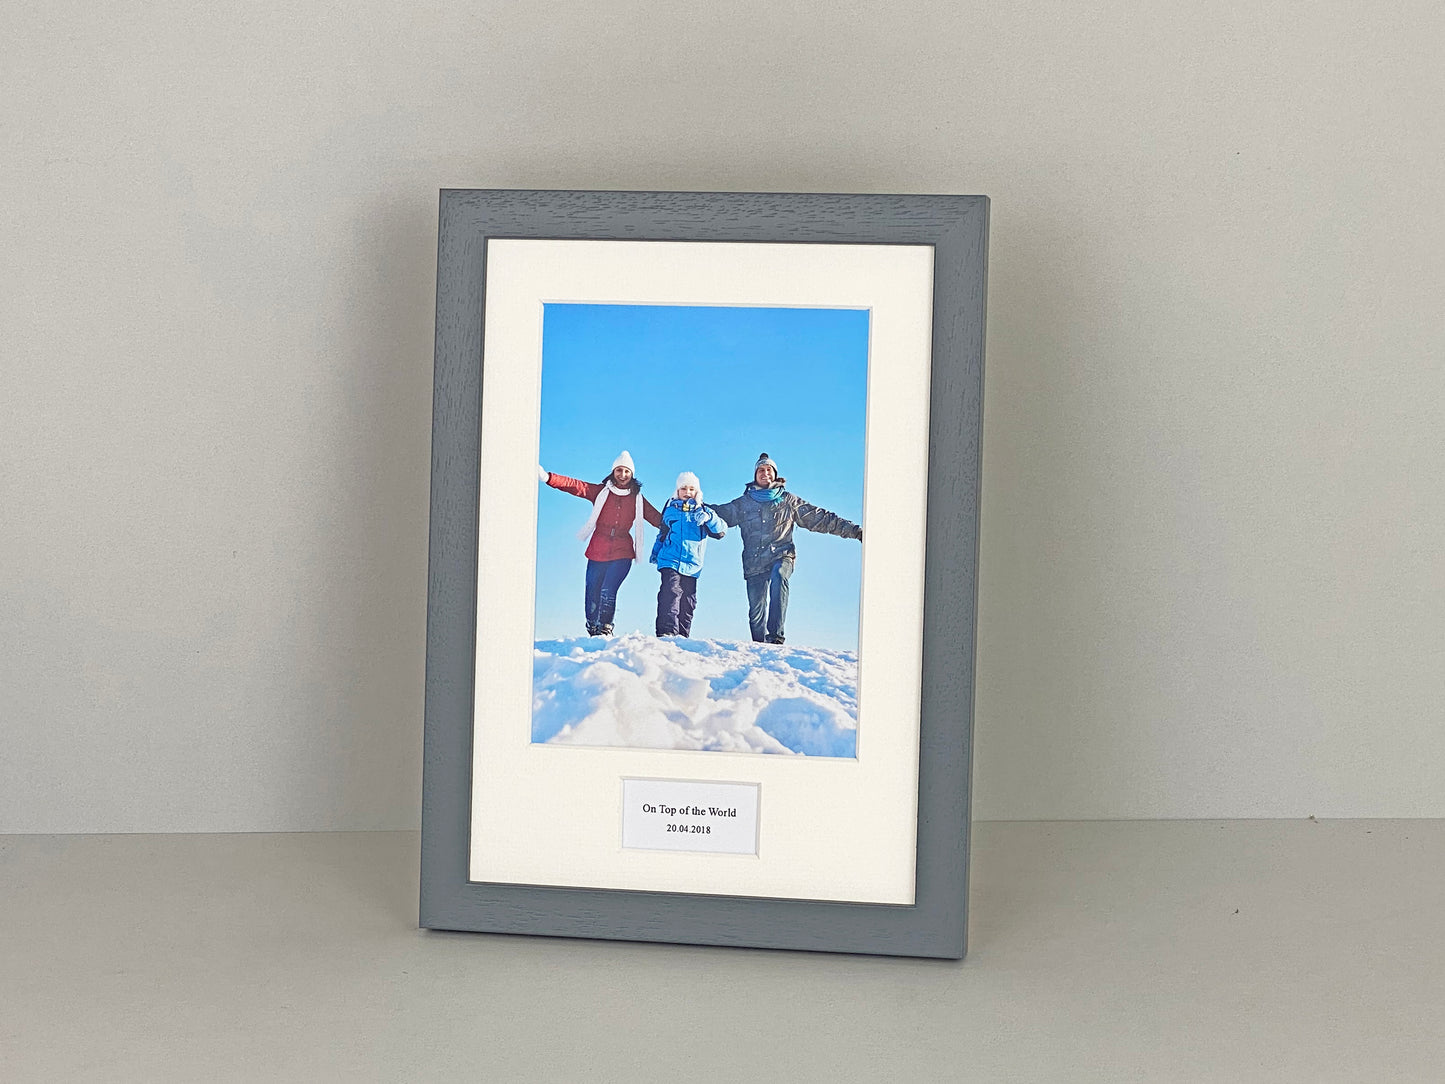 Personalised Caption Frames. A4 Frame with 8x6" Photo. Your Text and Photo to treasure a special memory. Handmade by Art@Home in the UK